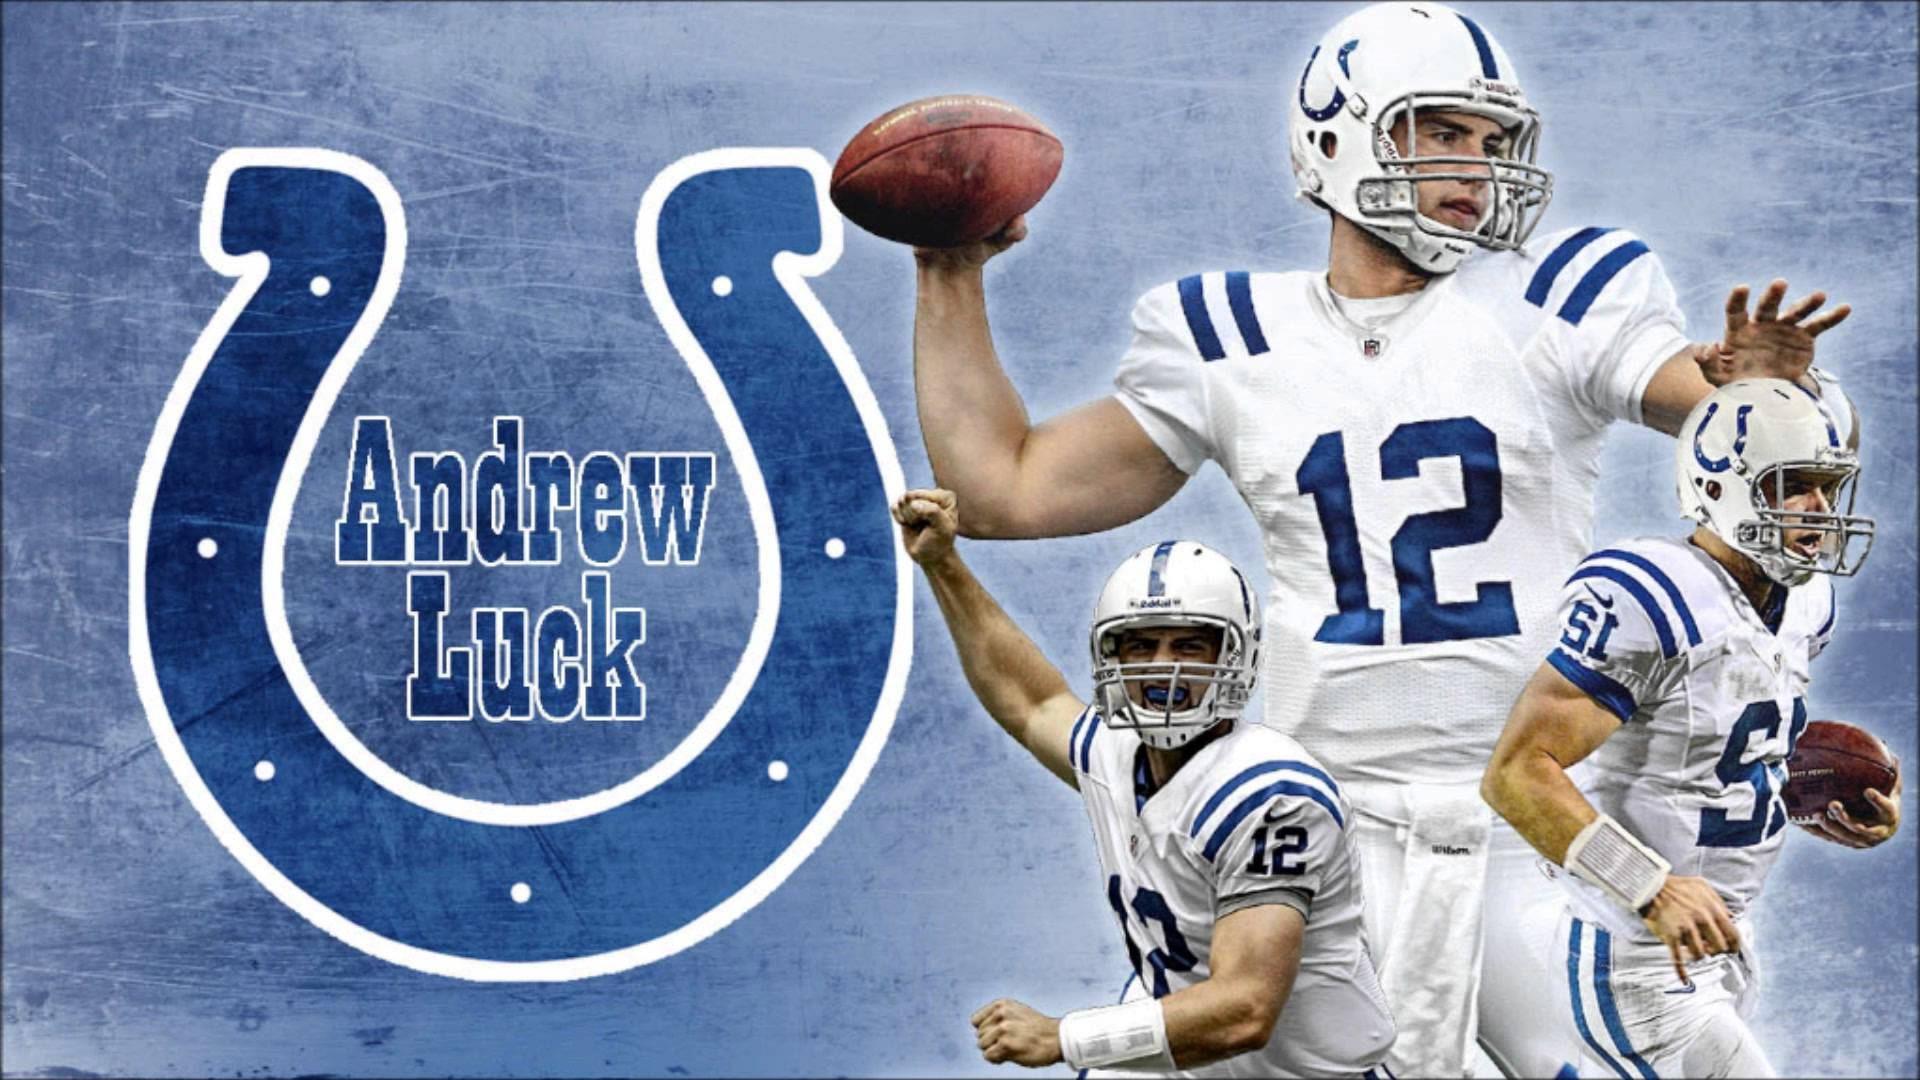 Andrew Luck wallpaper HD free download